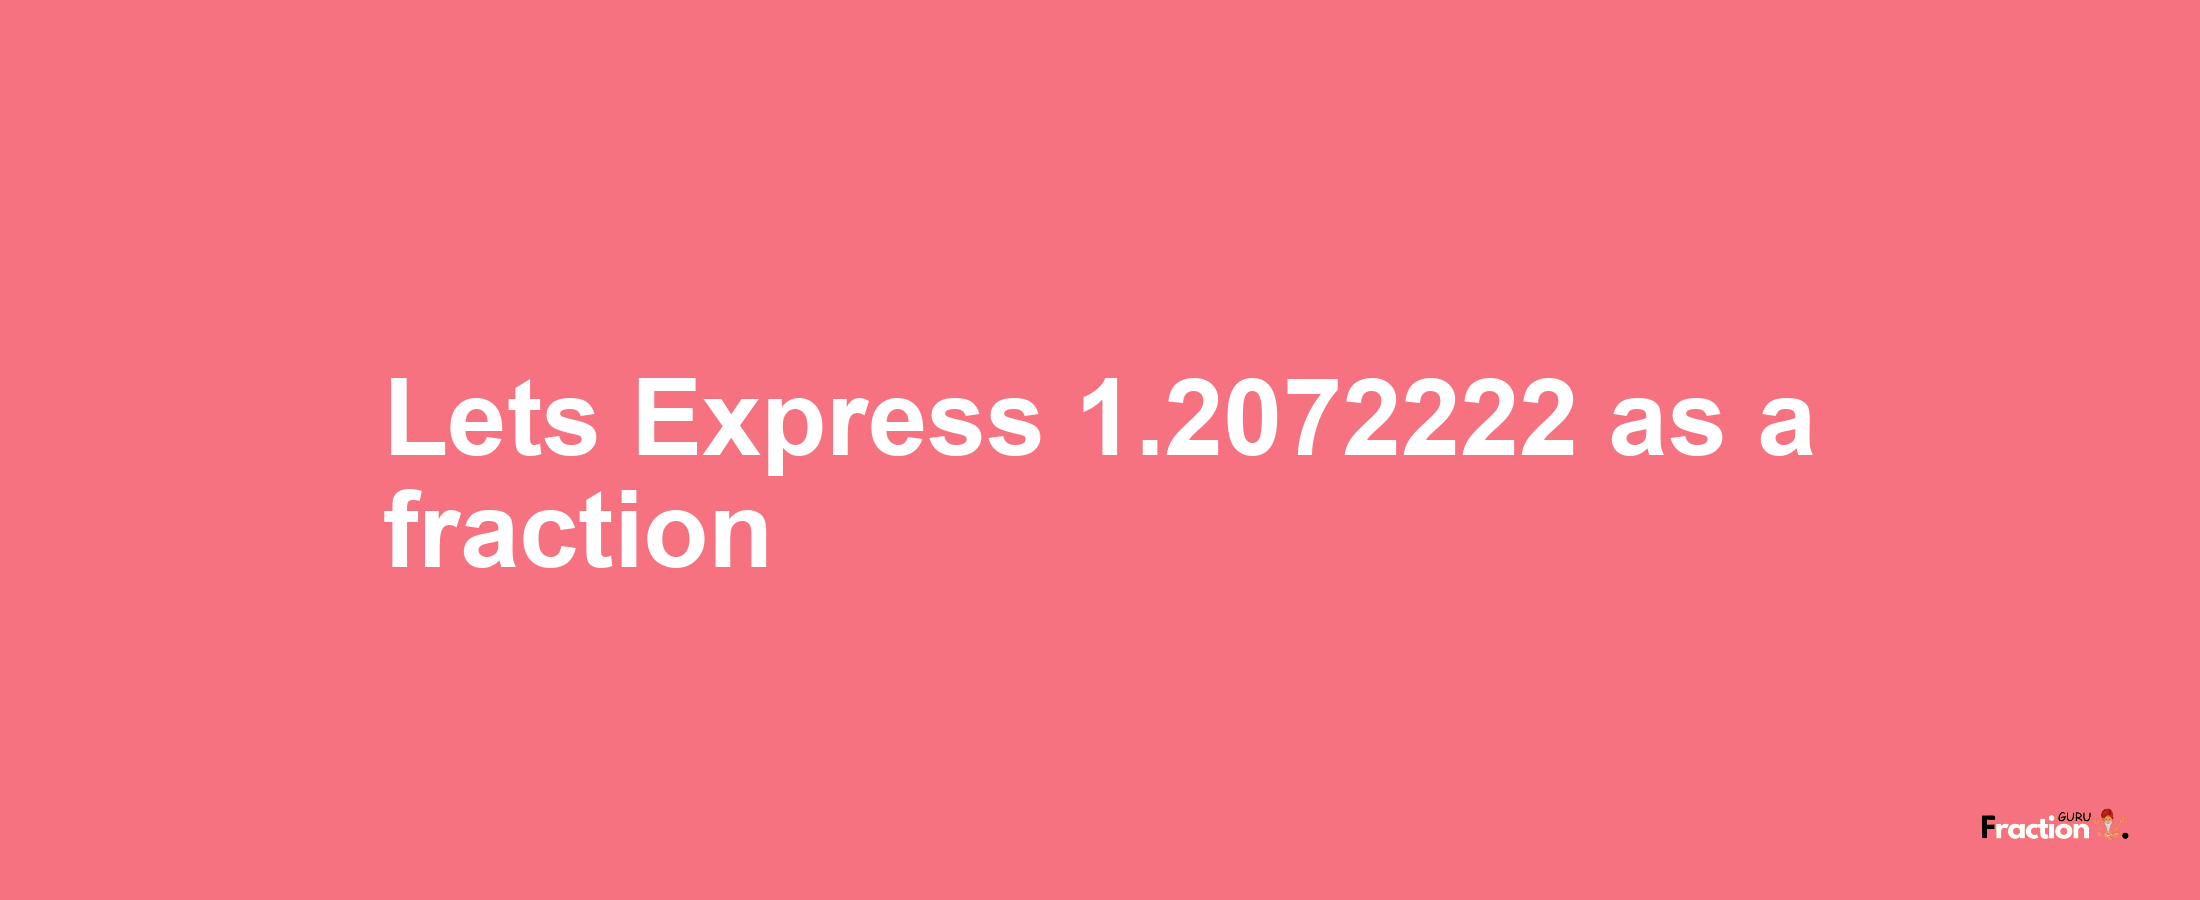 Lets Express 1.2072222 as afraction